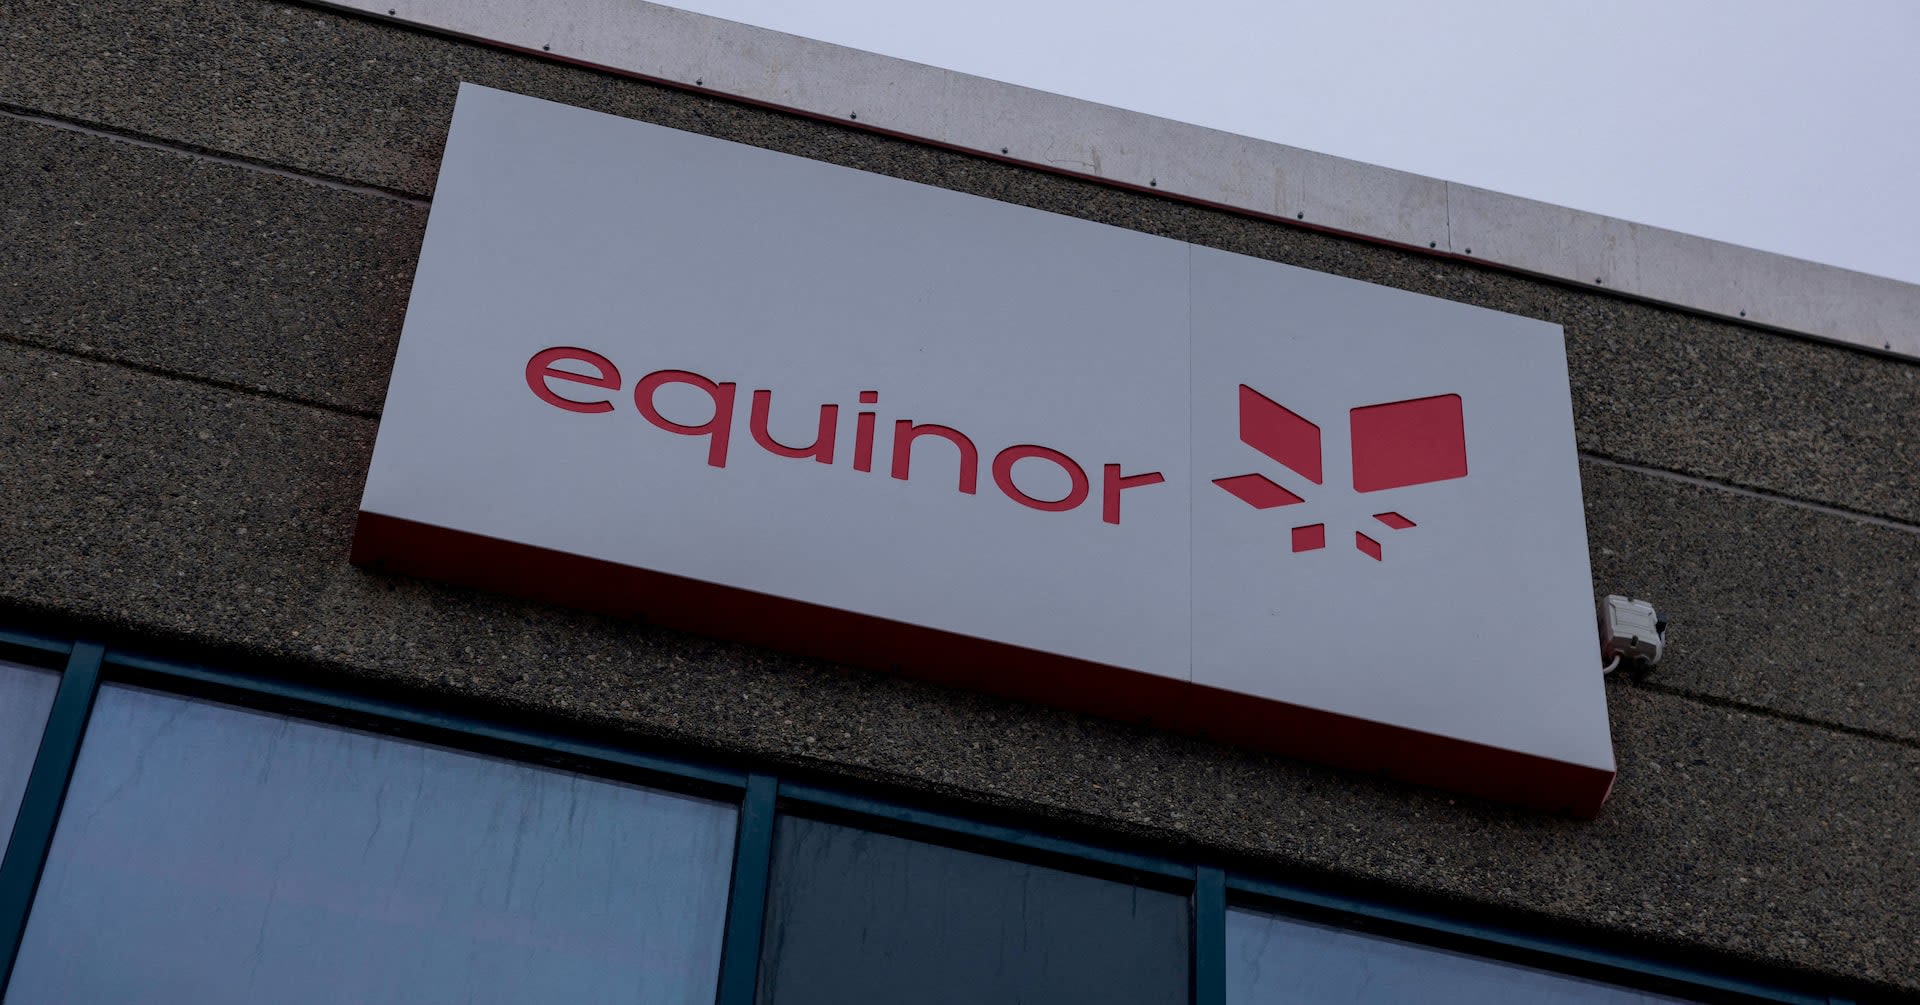 Equinor to boost Troll gas output with $1.1 bln investment